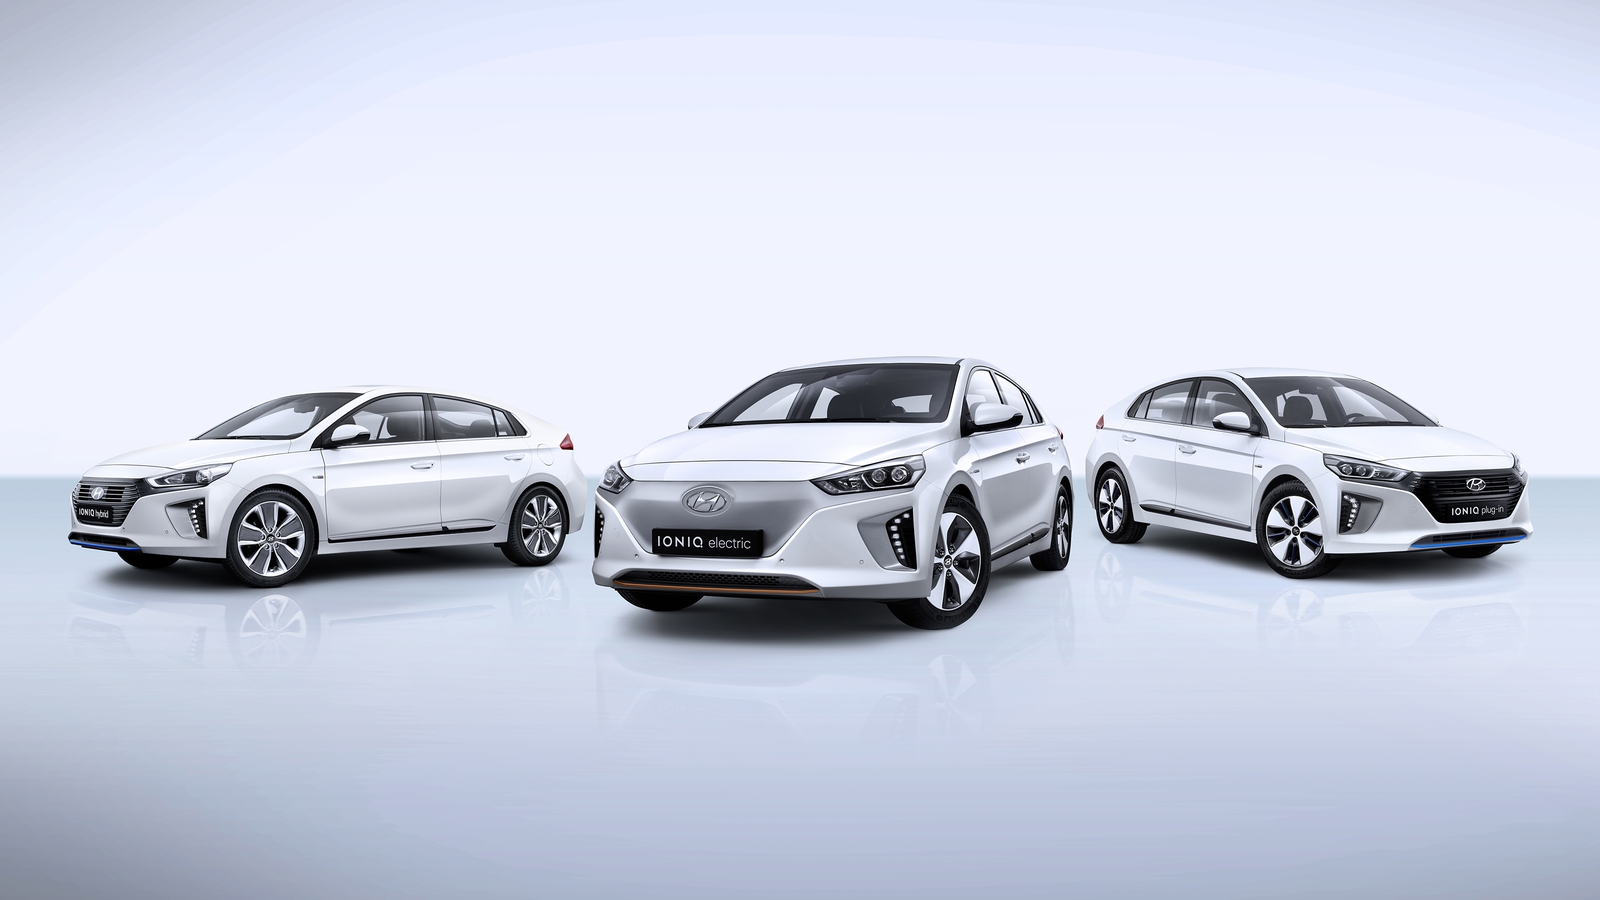 2017 Hyundai Ioniq electric car is long on features, short on range